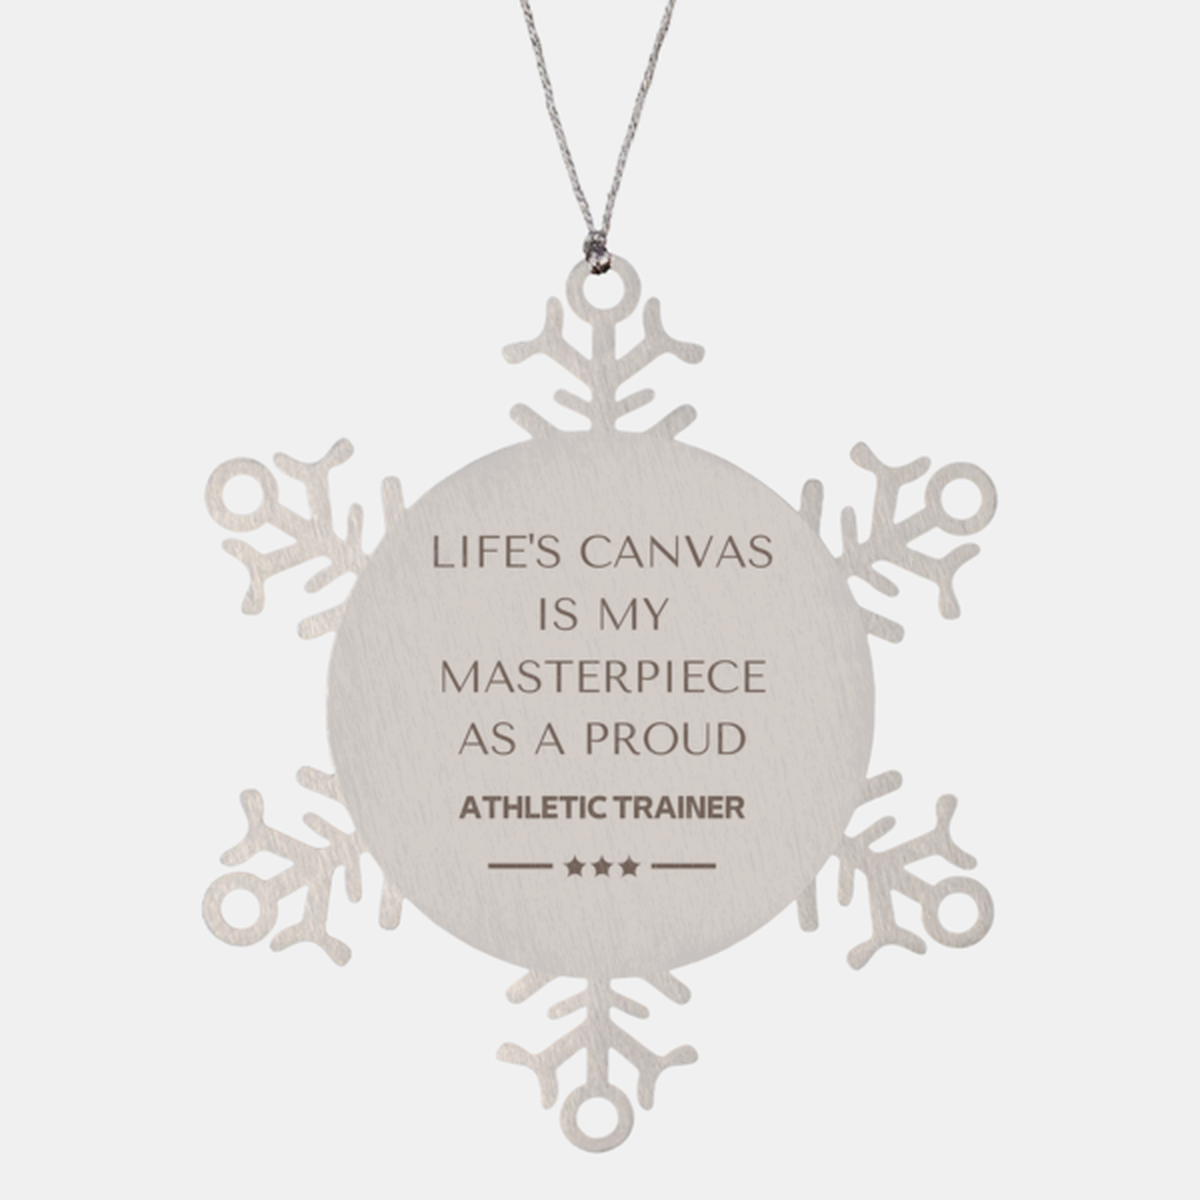 Proud Athletic Trainer Gifts, Life's canvas is my masterpiece, Epic Birthday Christmas Unique Snowflake Ornament For Athletic Trainer, Coworkers, Men, Women, Friends